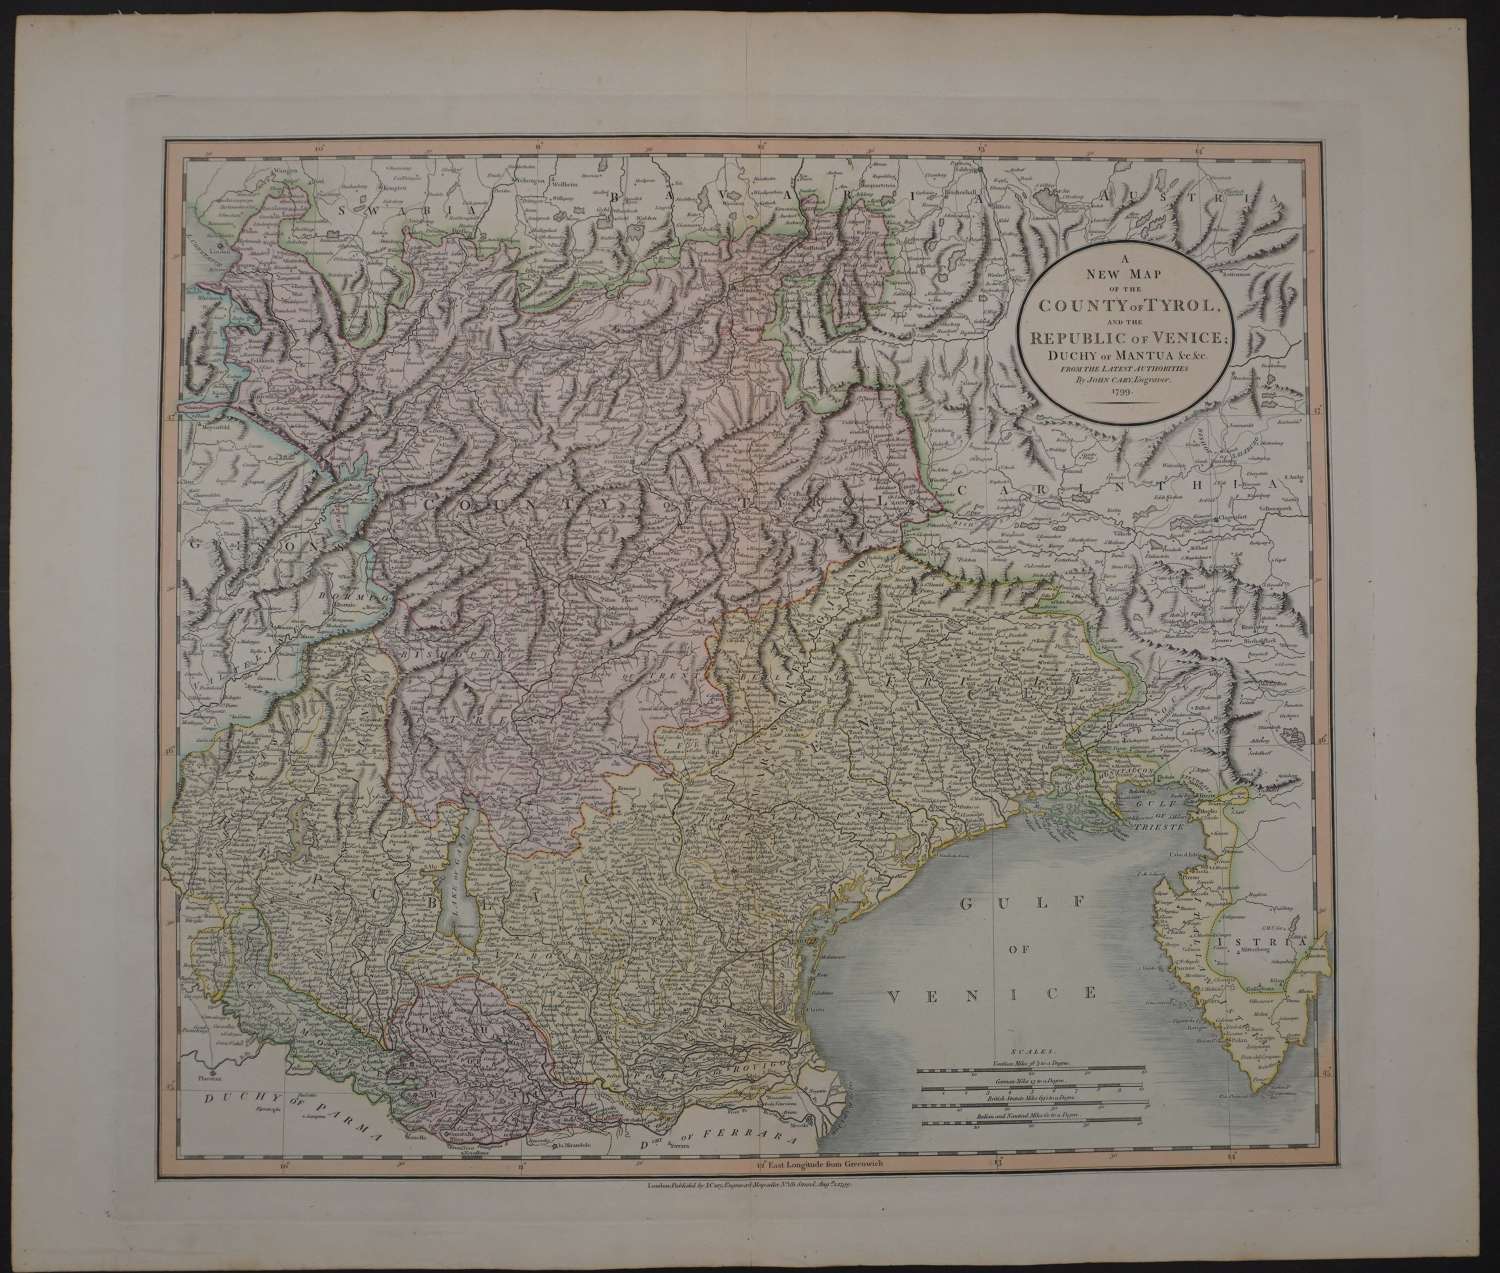 A New Map of the County of Tyrol and the Republic of Venice by John Ca